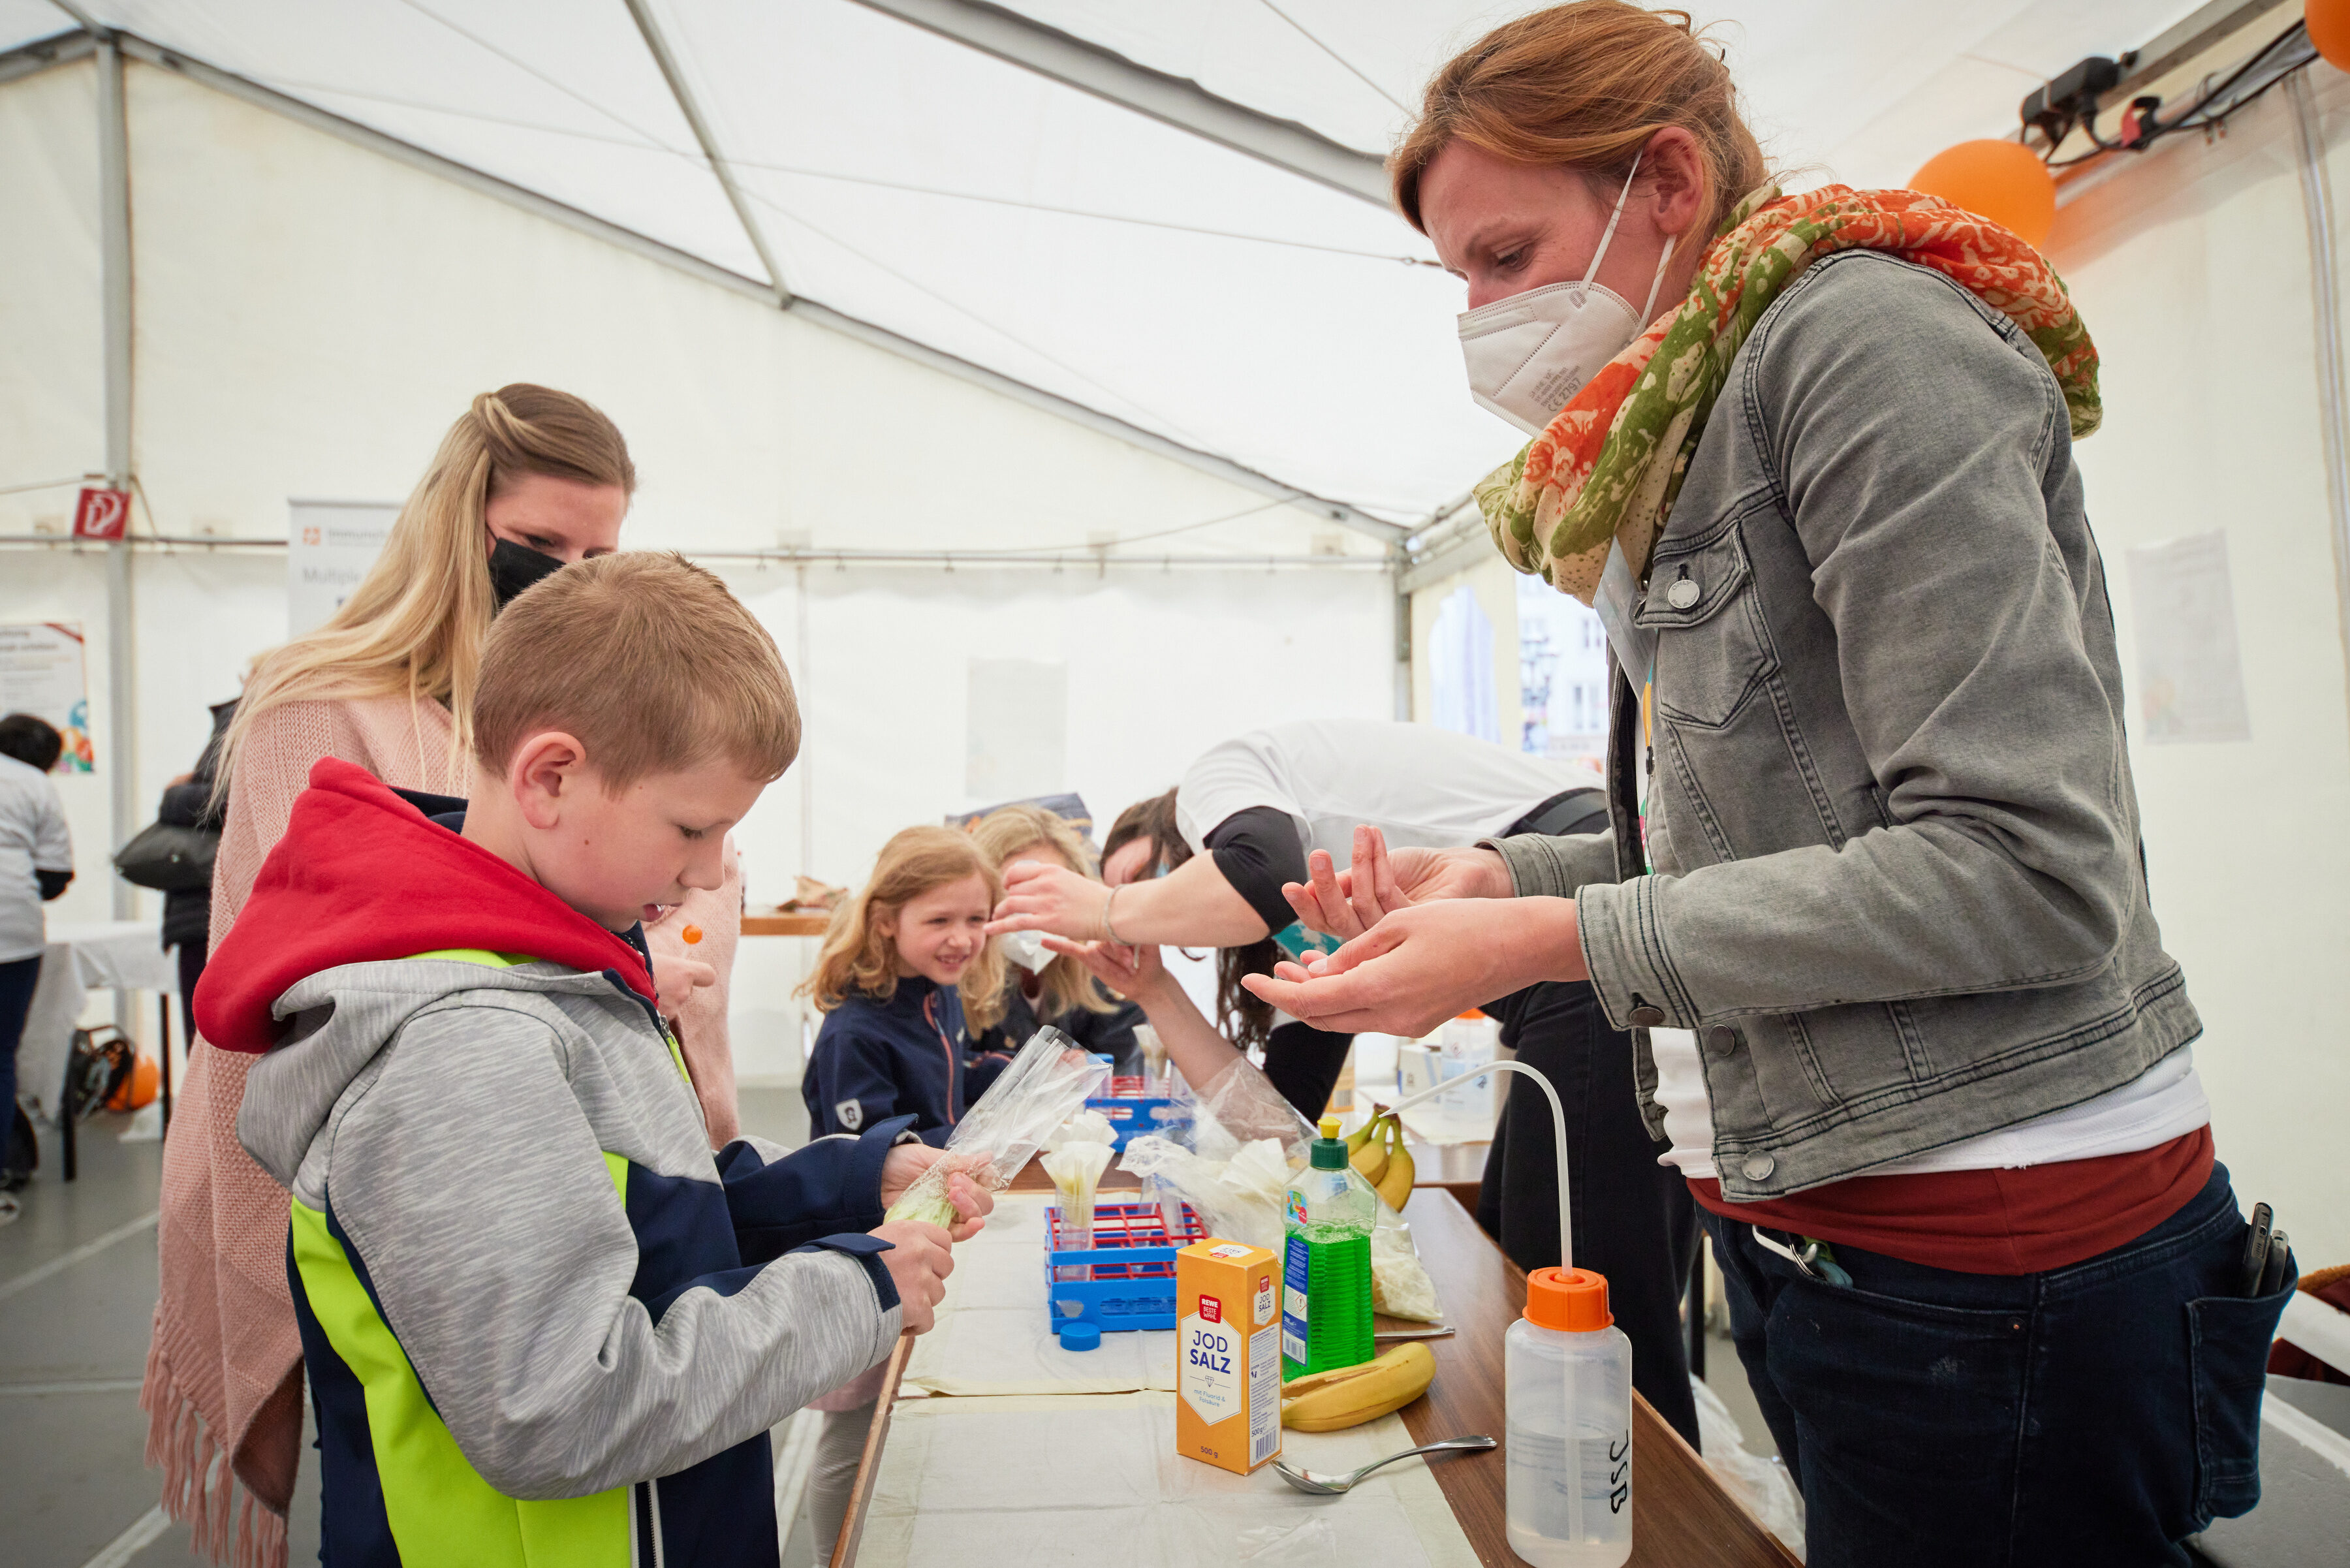 Day of Immunology 2022 - Dr. Alexandra Krämer showing kids how to extract DNA from a banana